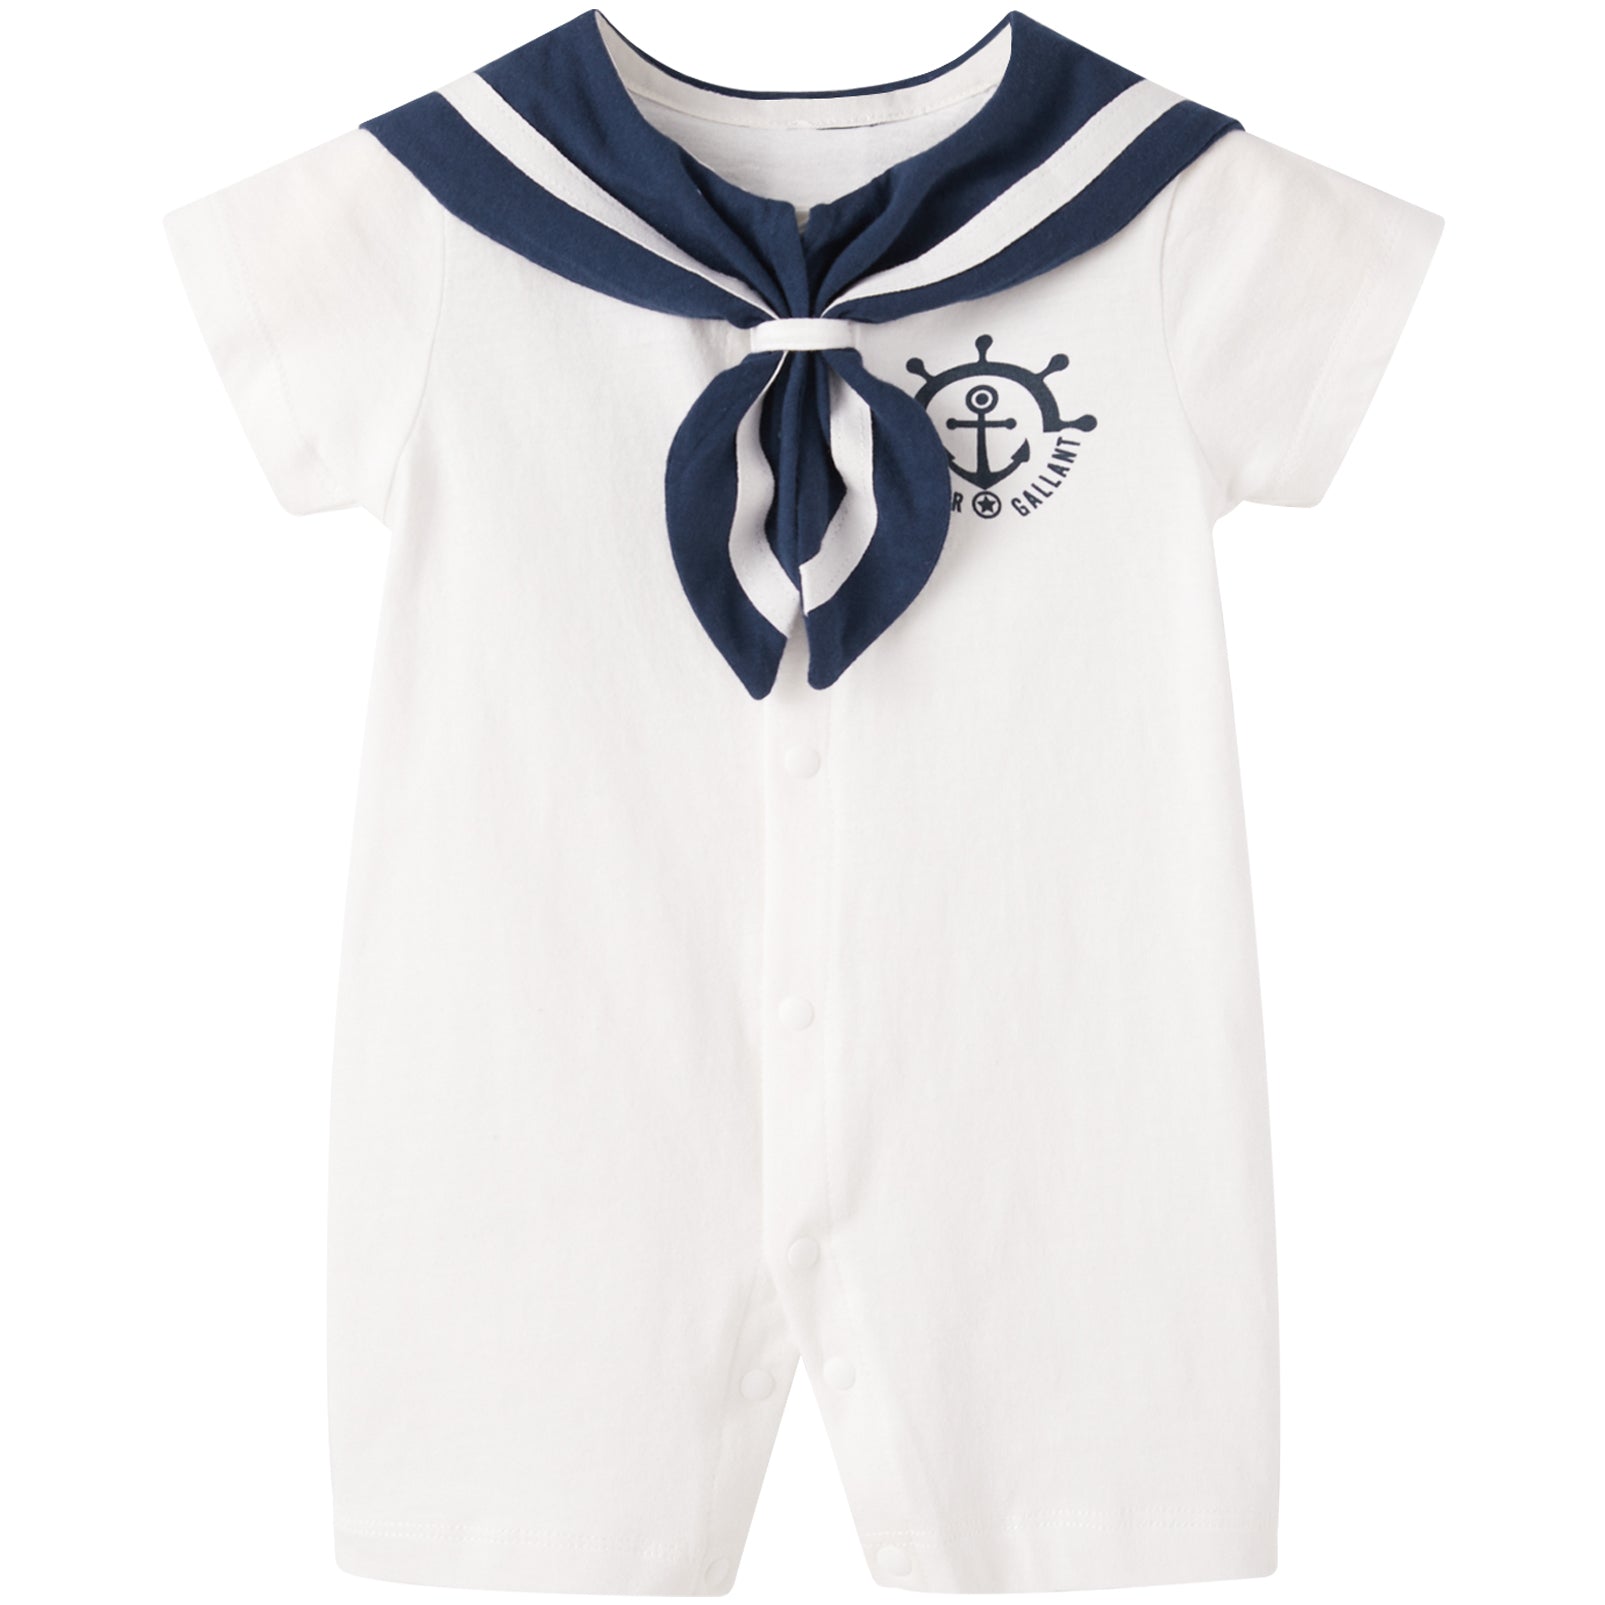 pureborn Baby Boys Romper Short Sleeve Nautical Romper One-Piece Beach Outfit